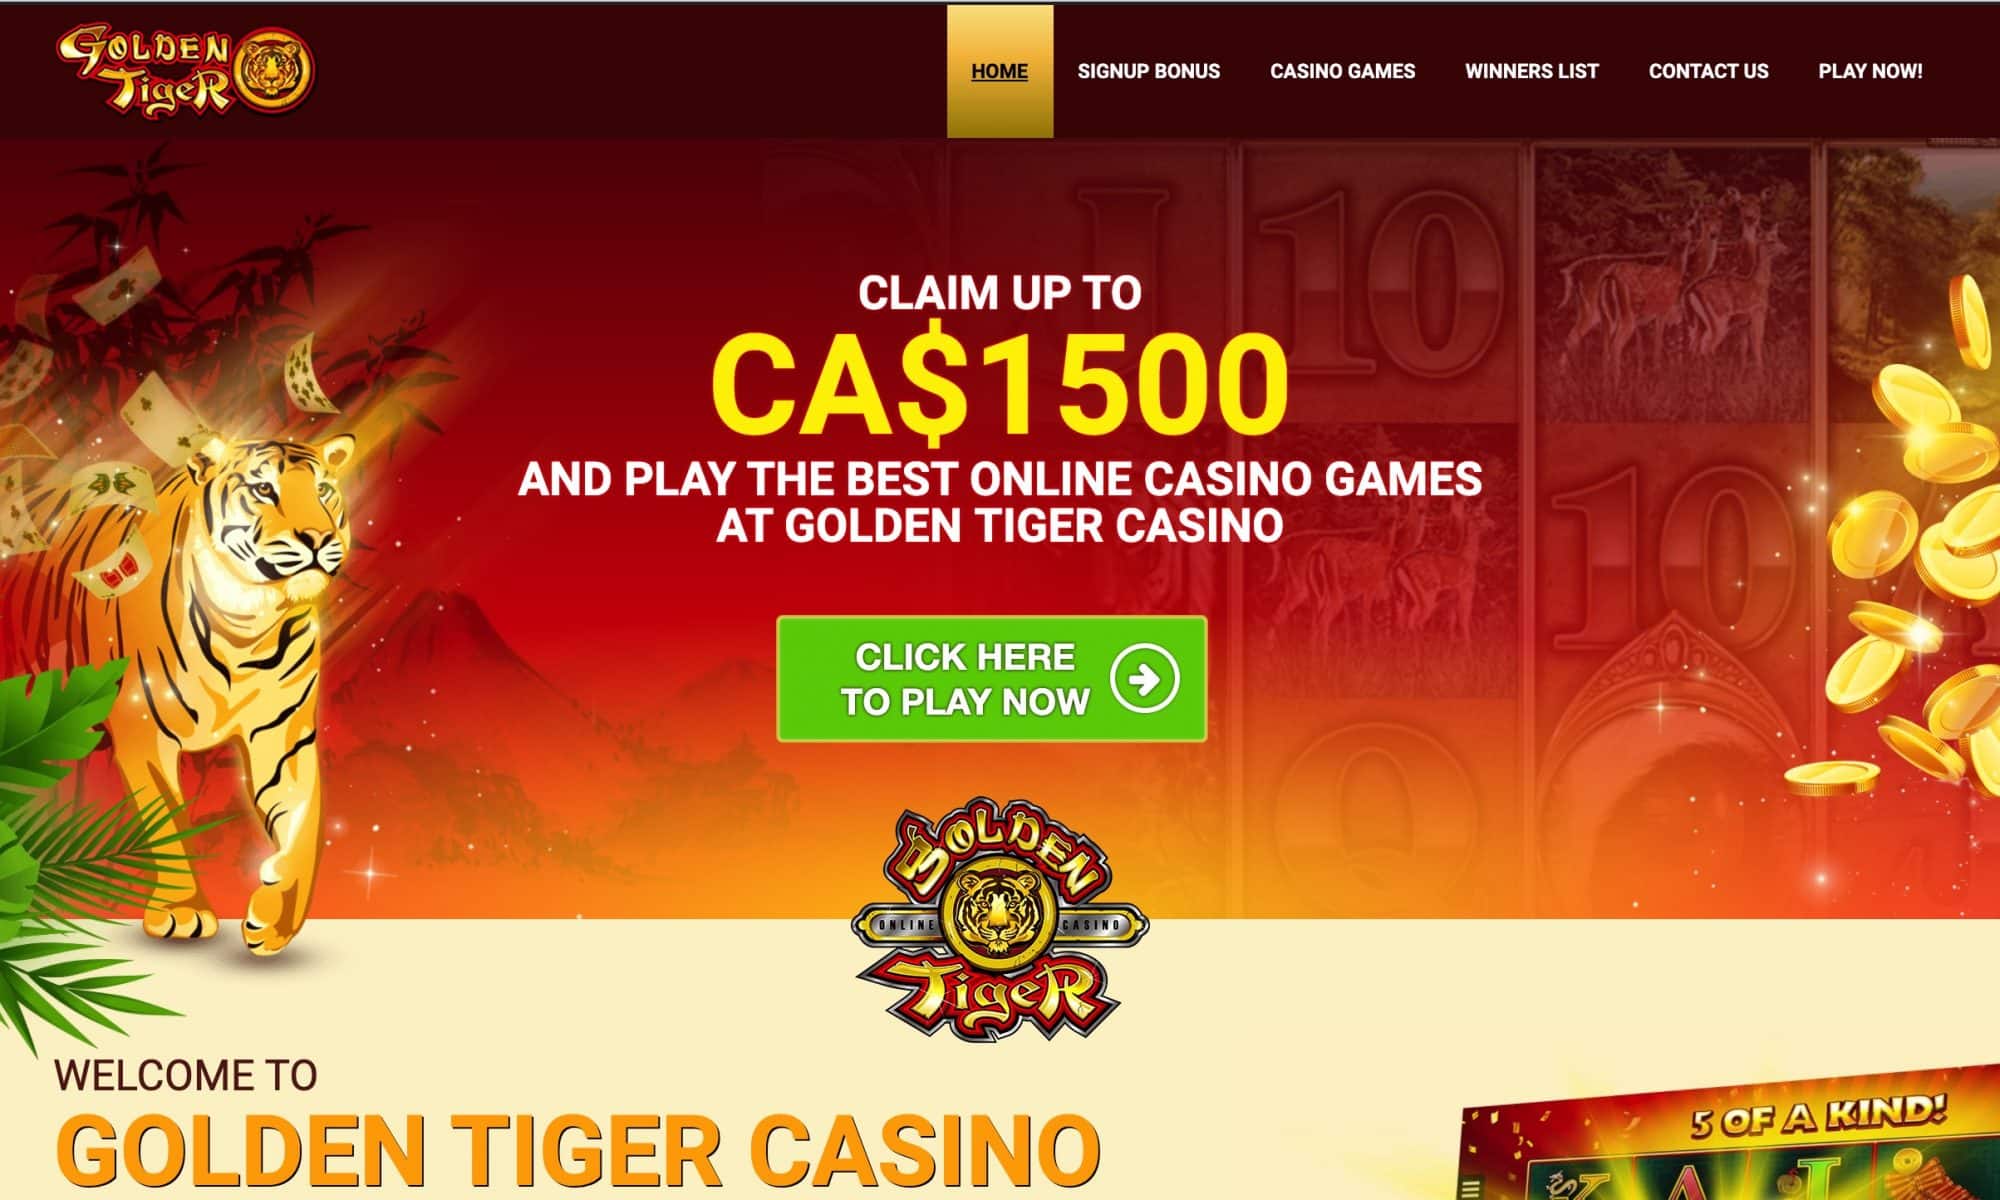 Golden Tiger Casino - Claim up to $1500 in free bonuses!